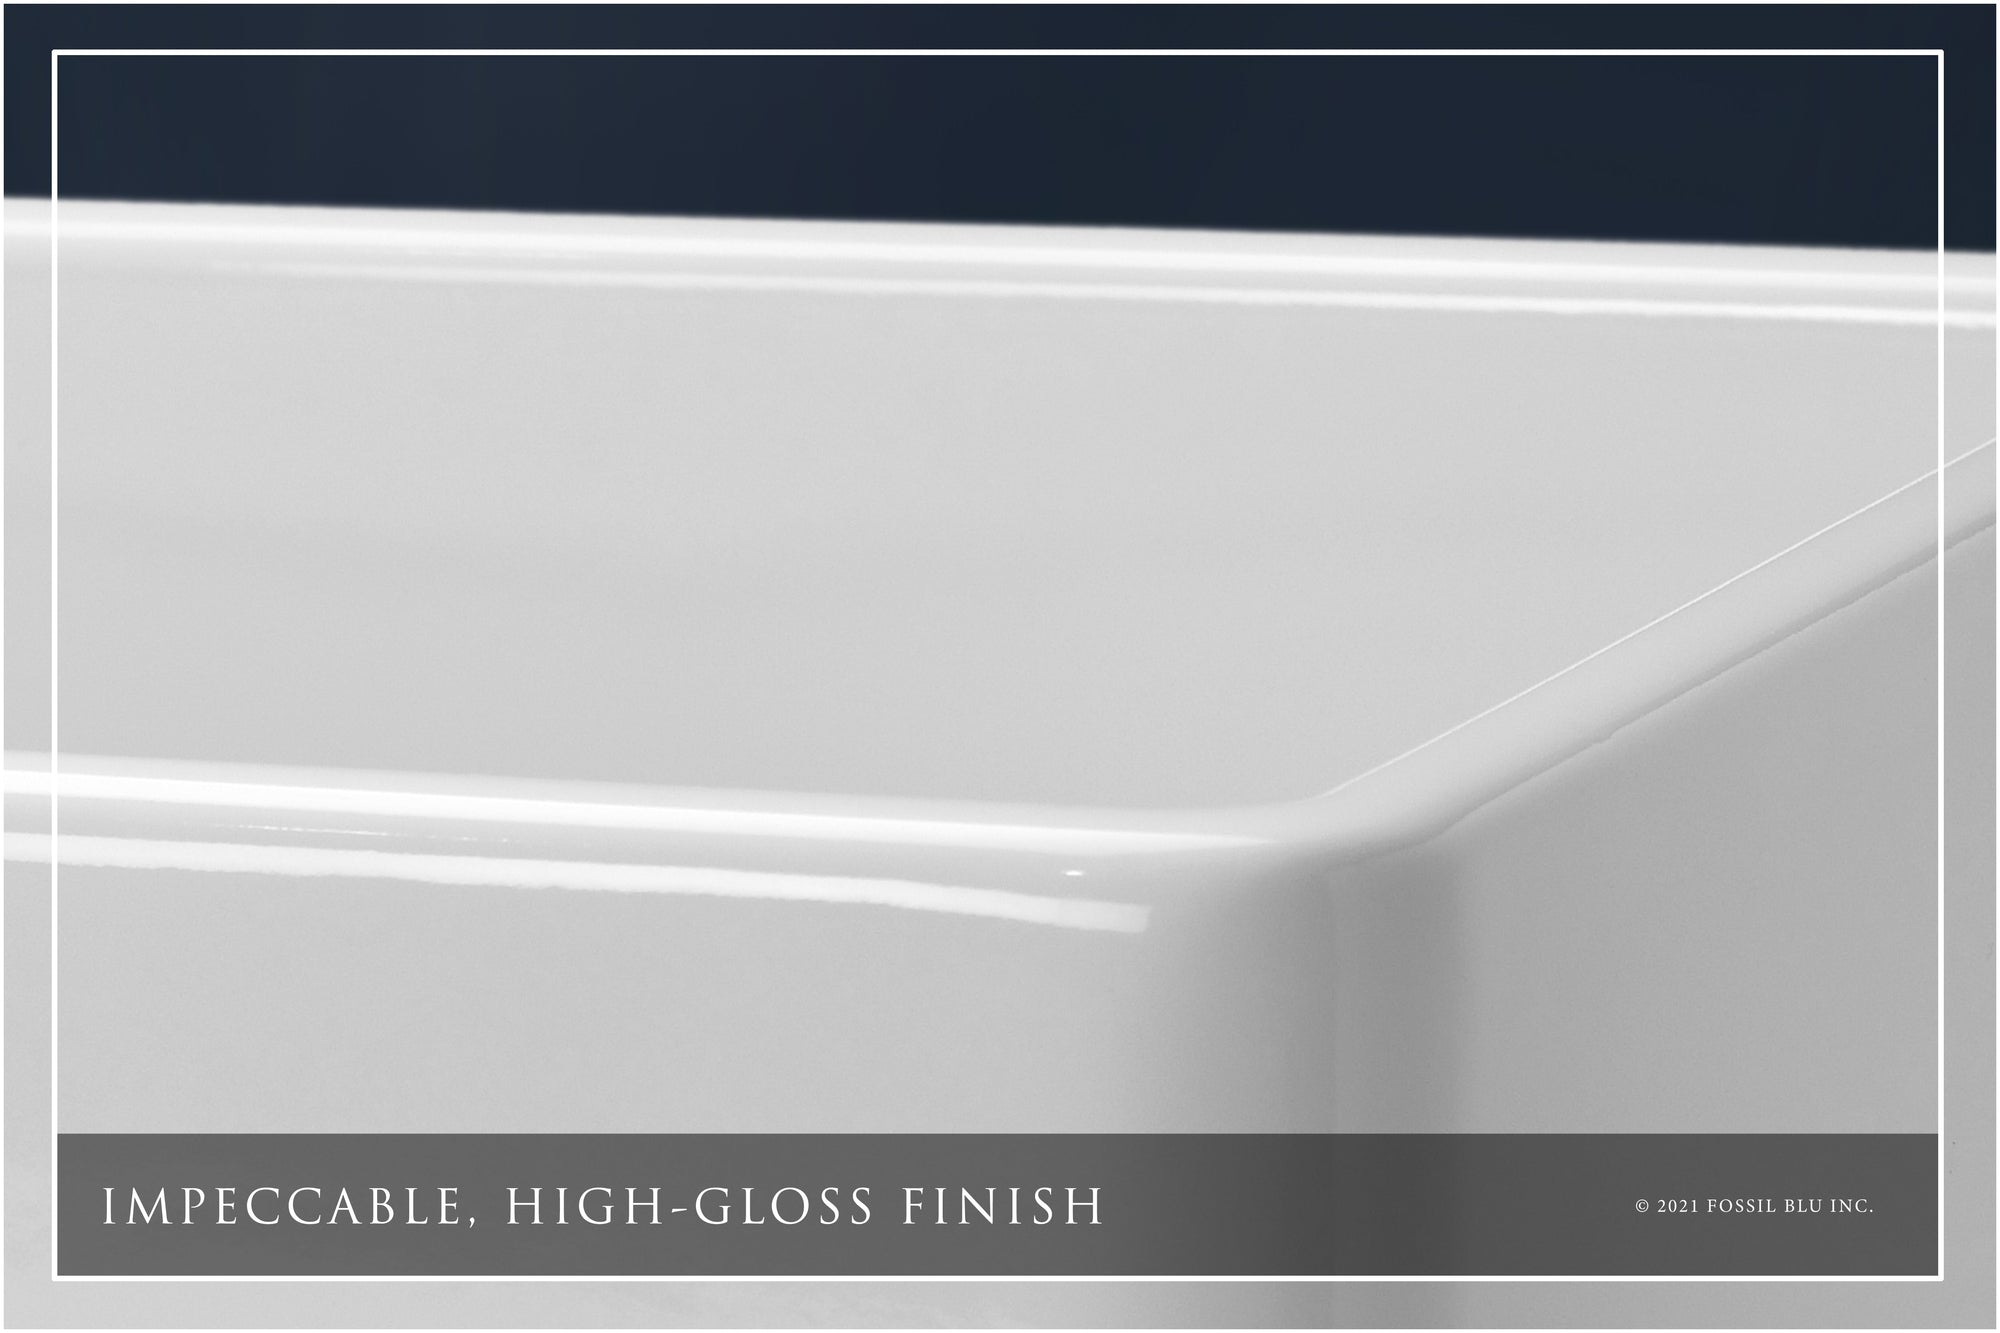 FSW1002BB LUXURY 33-INCH SOLID FIRECLAY FARMHOUSE SINK IN WHITE, MATTE GOLD ACCS, FLAT FRONT